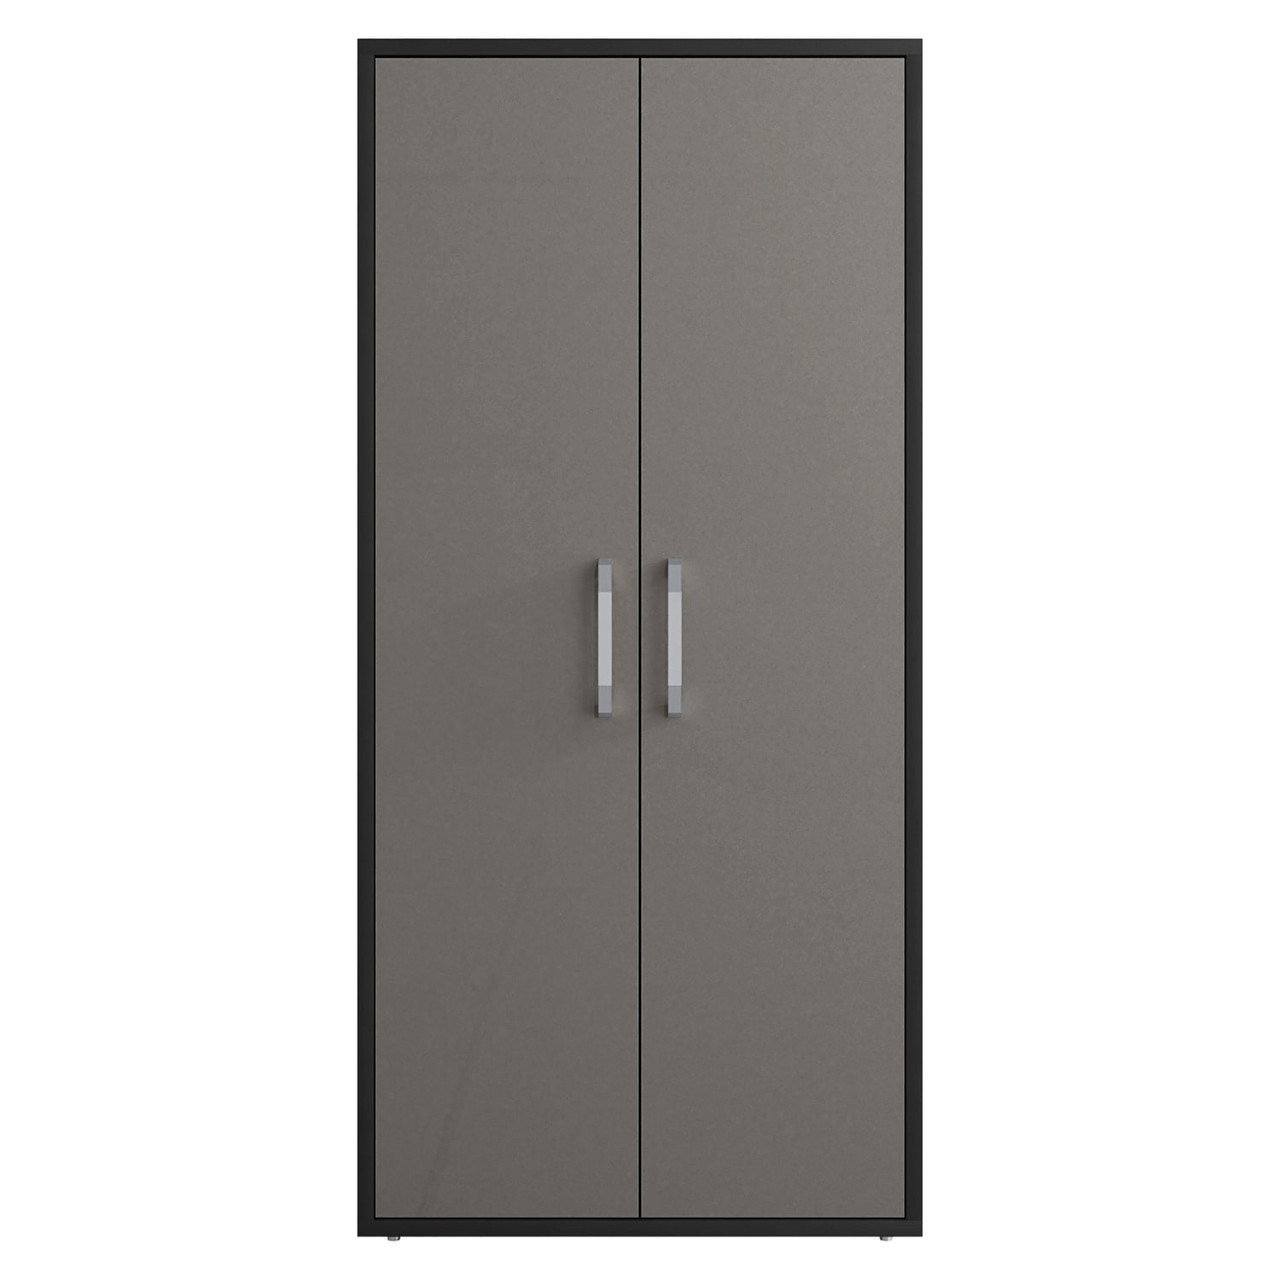 Eiffel 73.43” Garage Cabinet with 4 Adjustable Shelves in Gray Gloss